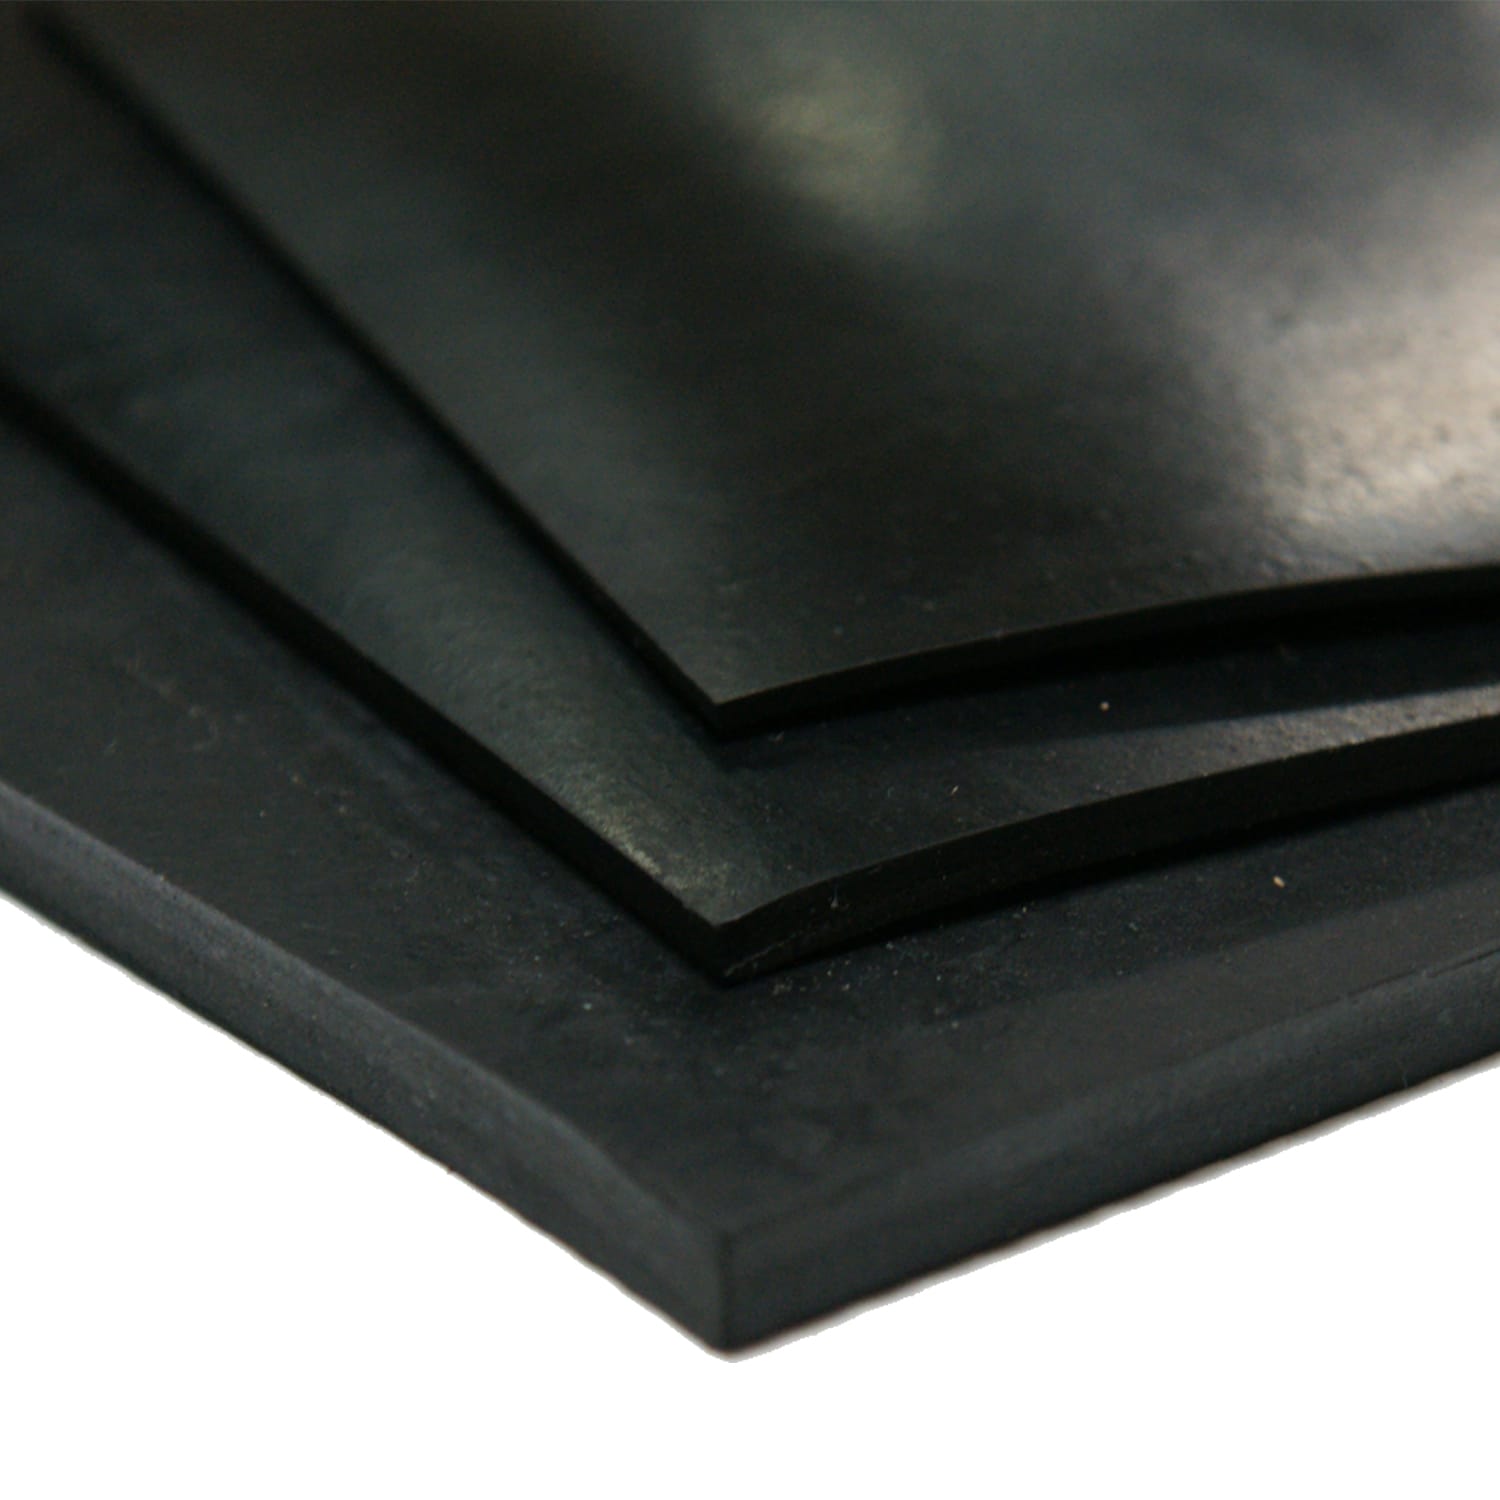 Rubber-Cal General-purpose Rubber 1/8-in T x 24-in W x 36-in L Black  Commercial 60A Durometer Rubber Sheet